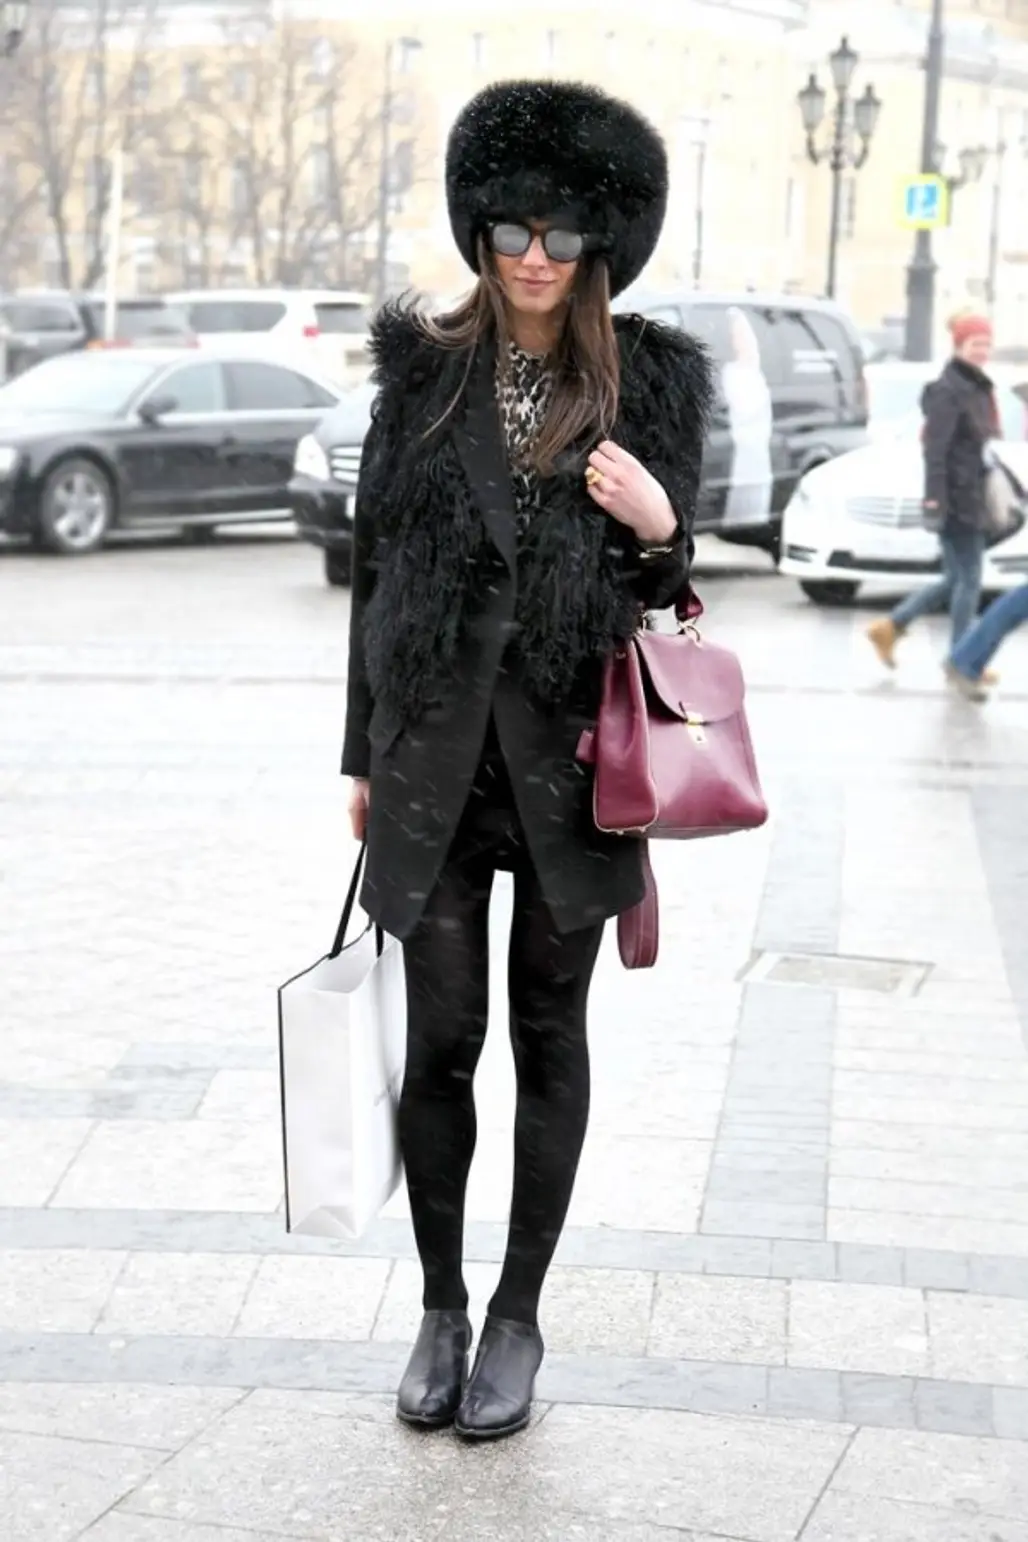 26 Bits of Winter Street Style Inspiration from Chilly Russia